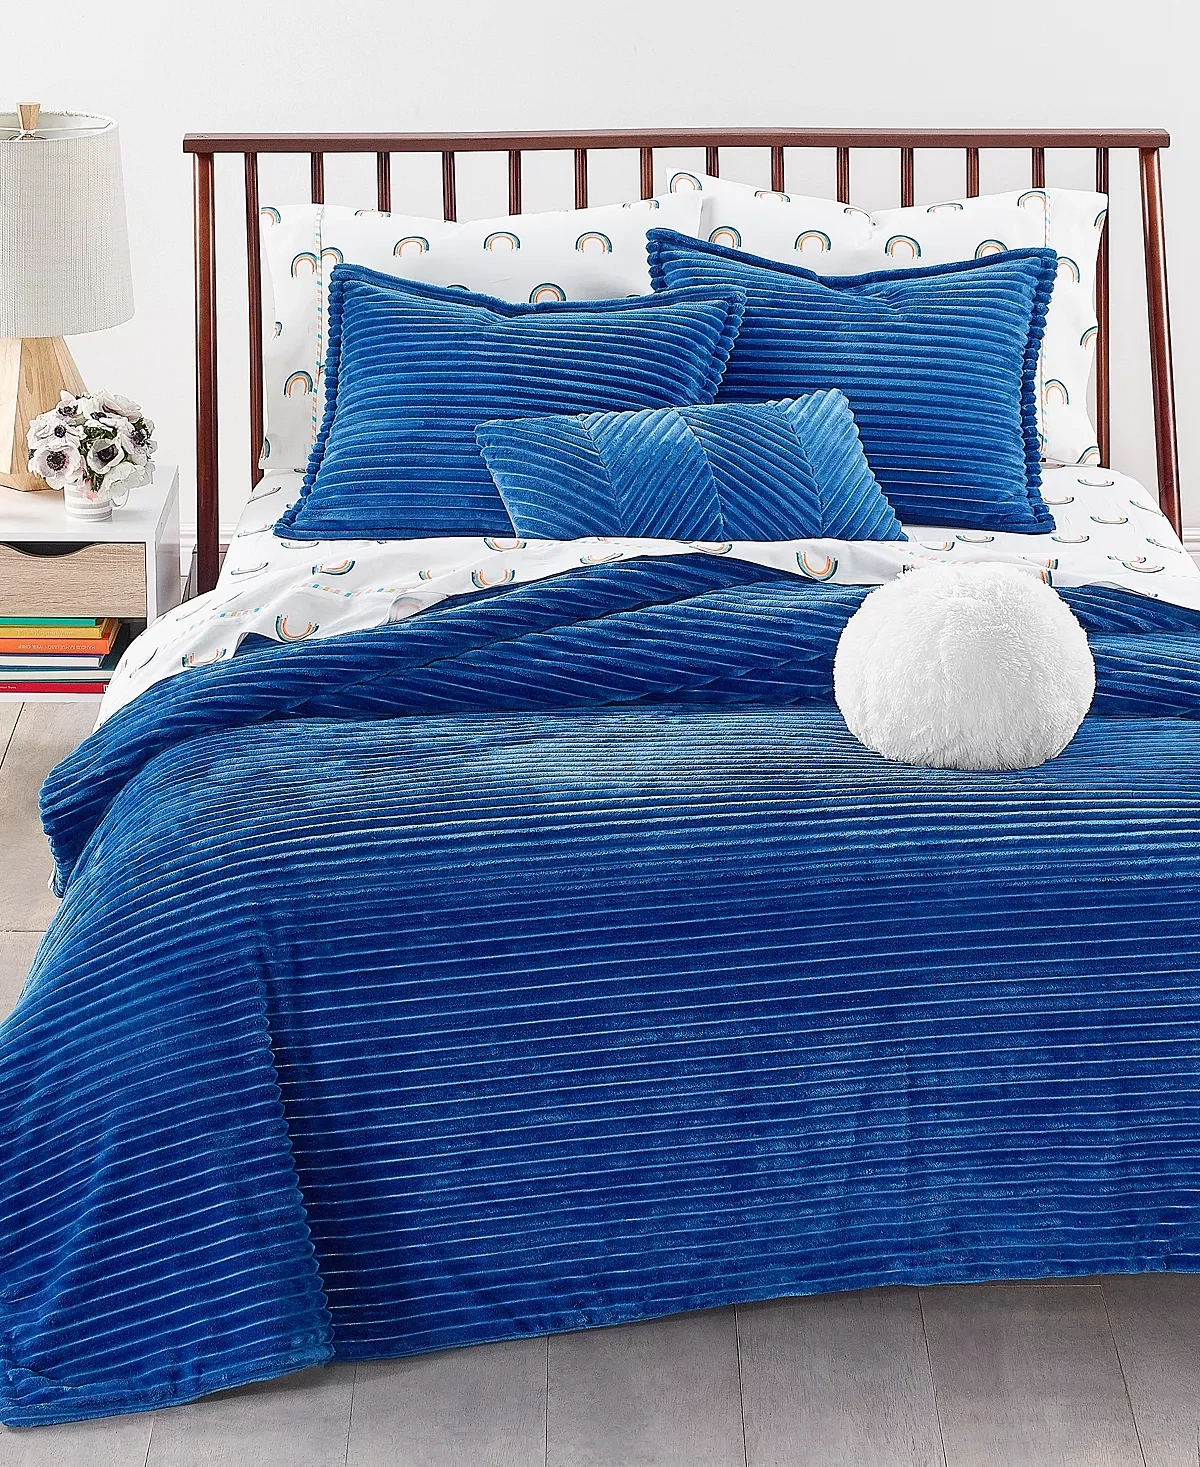 Whim by Martha Stewart Collection Corduroy 3-PC. Comforter Set Choose Sz/Color: Full/Queen/Blue